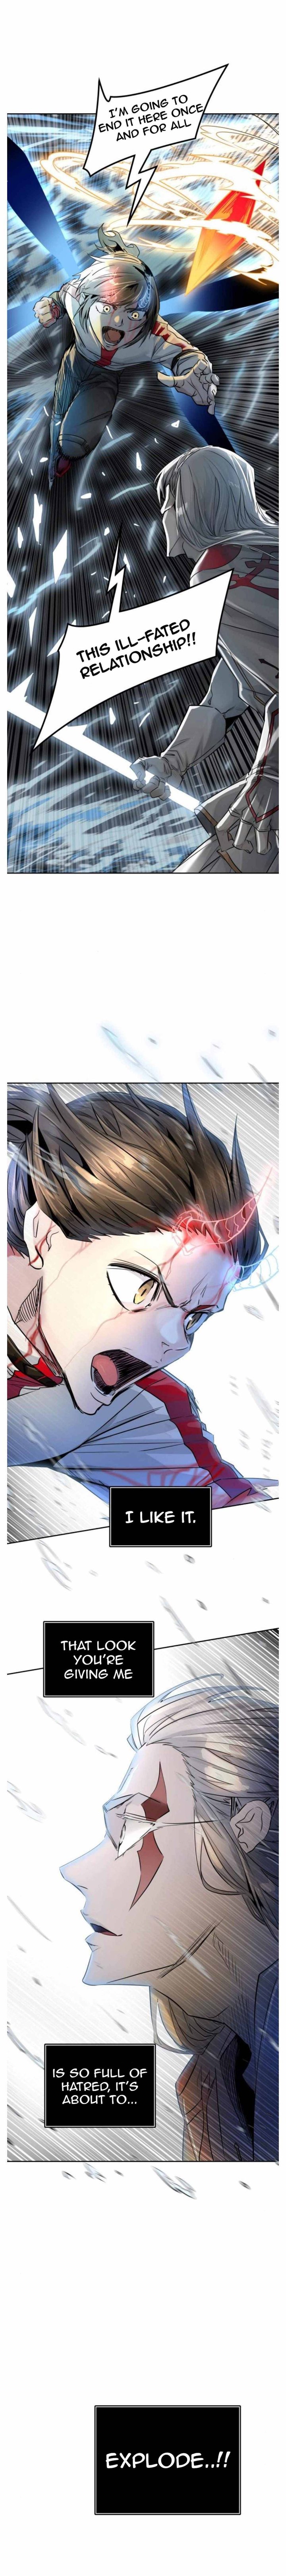 Tower Of God 504 16